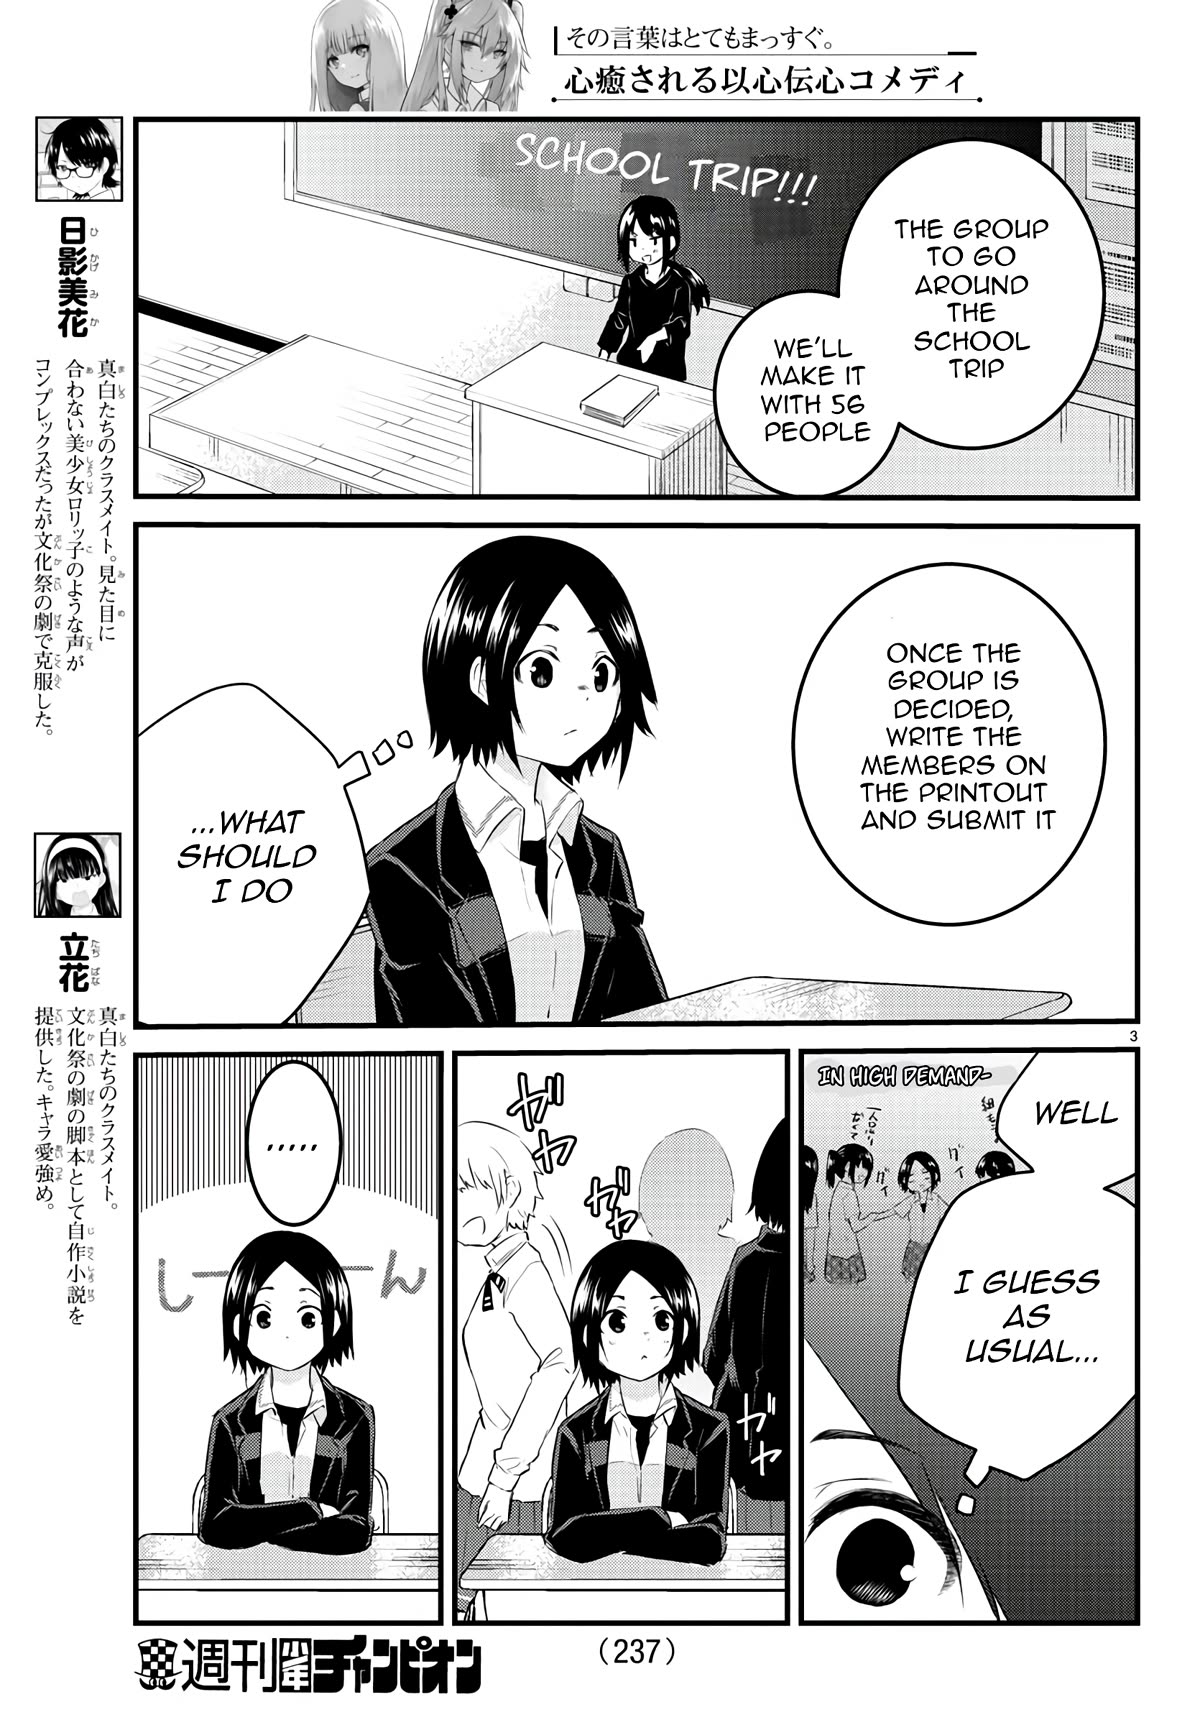 The Mute Girl And Her New Friend Chapter 68